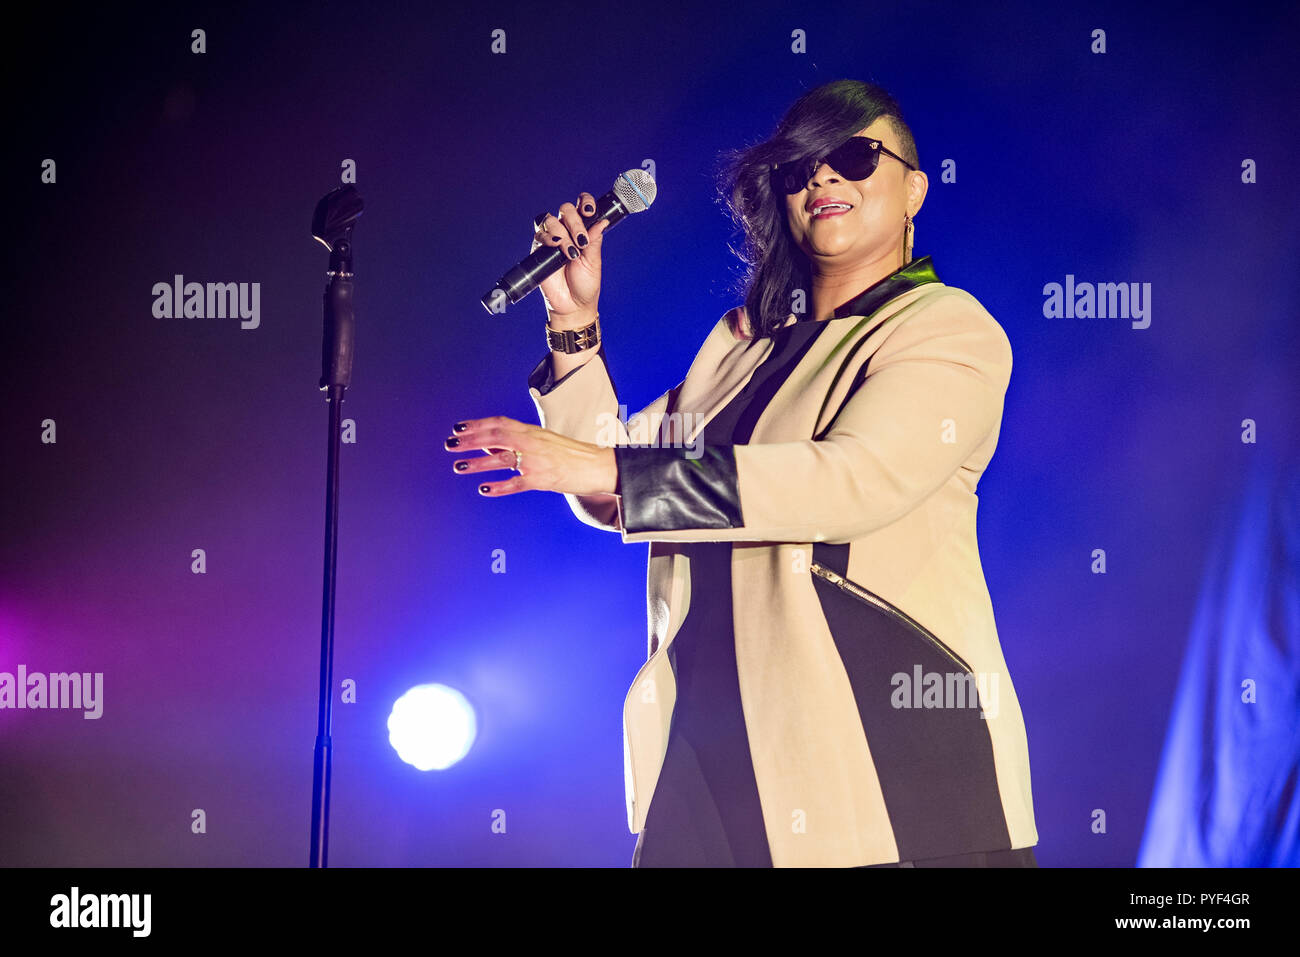 Manchester, UK. 27th October 2018. Gabrielle supporting Rick Astley at the Manchester Arena on his UK tour, Manchester 27/10/2018 Stock Photo